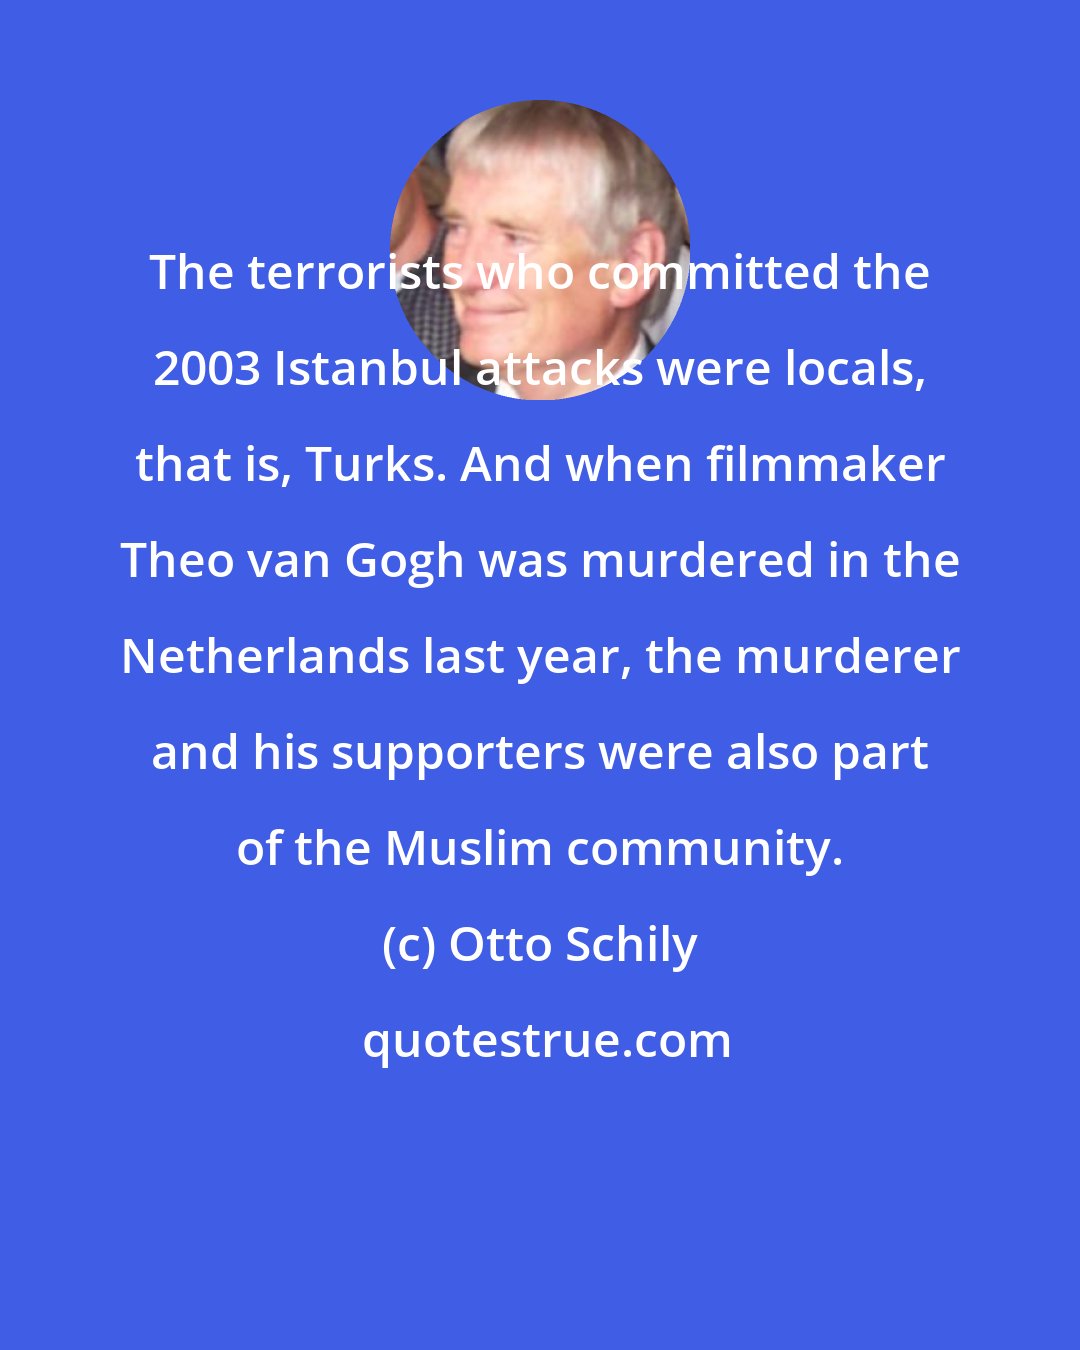 Otto Schily: The terrorists who committed the 2003 Istanbul attacks were locals, that is, Turks. And when filmmaker Theo van Gogh was murdered in the Netherlands last year, the murderer and his supporters were also part of the Muslim community.